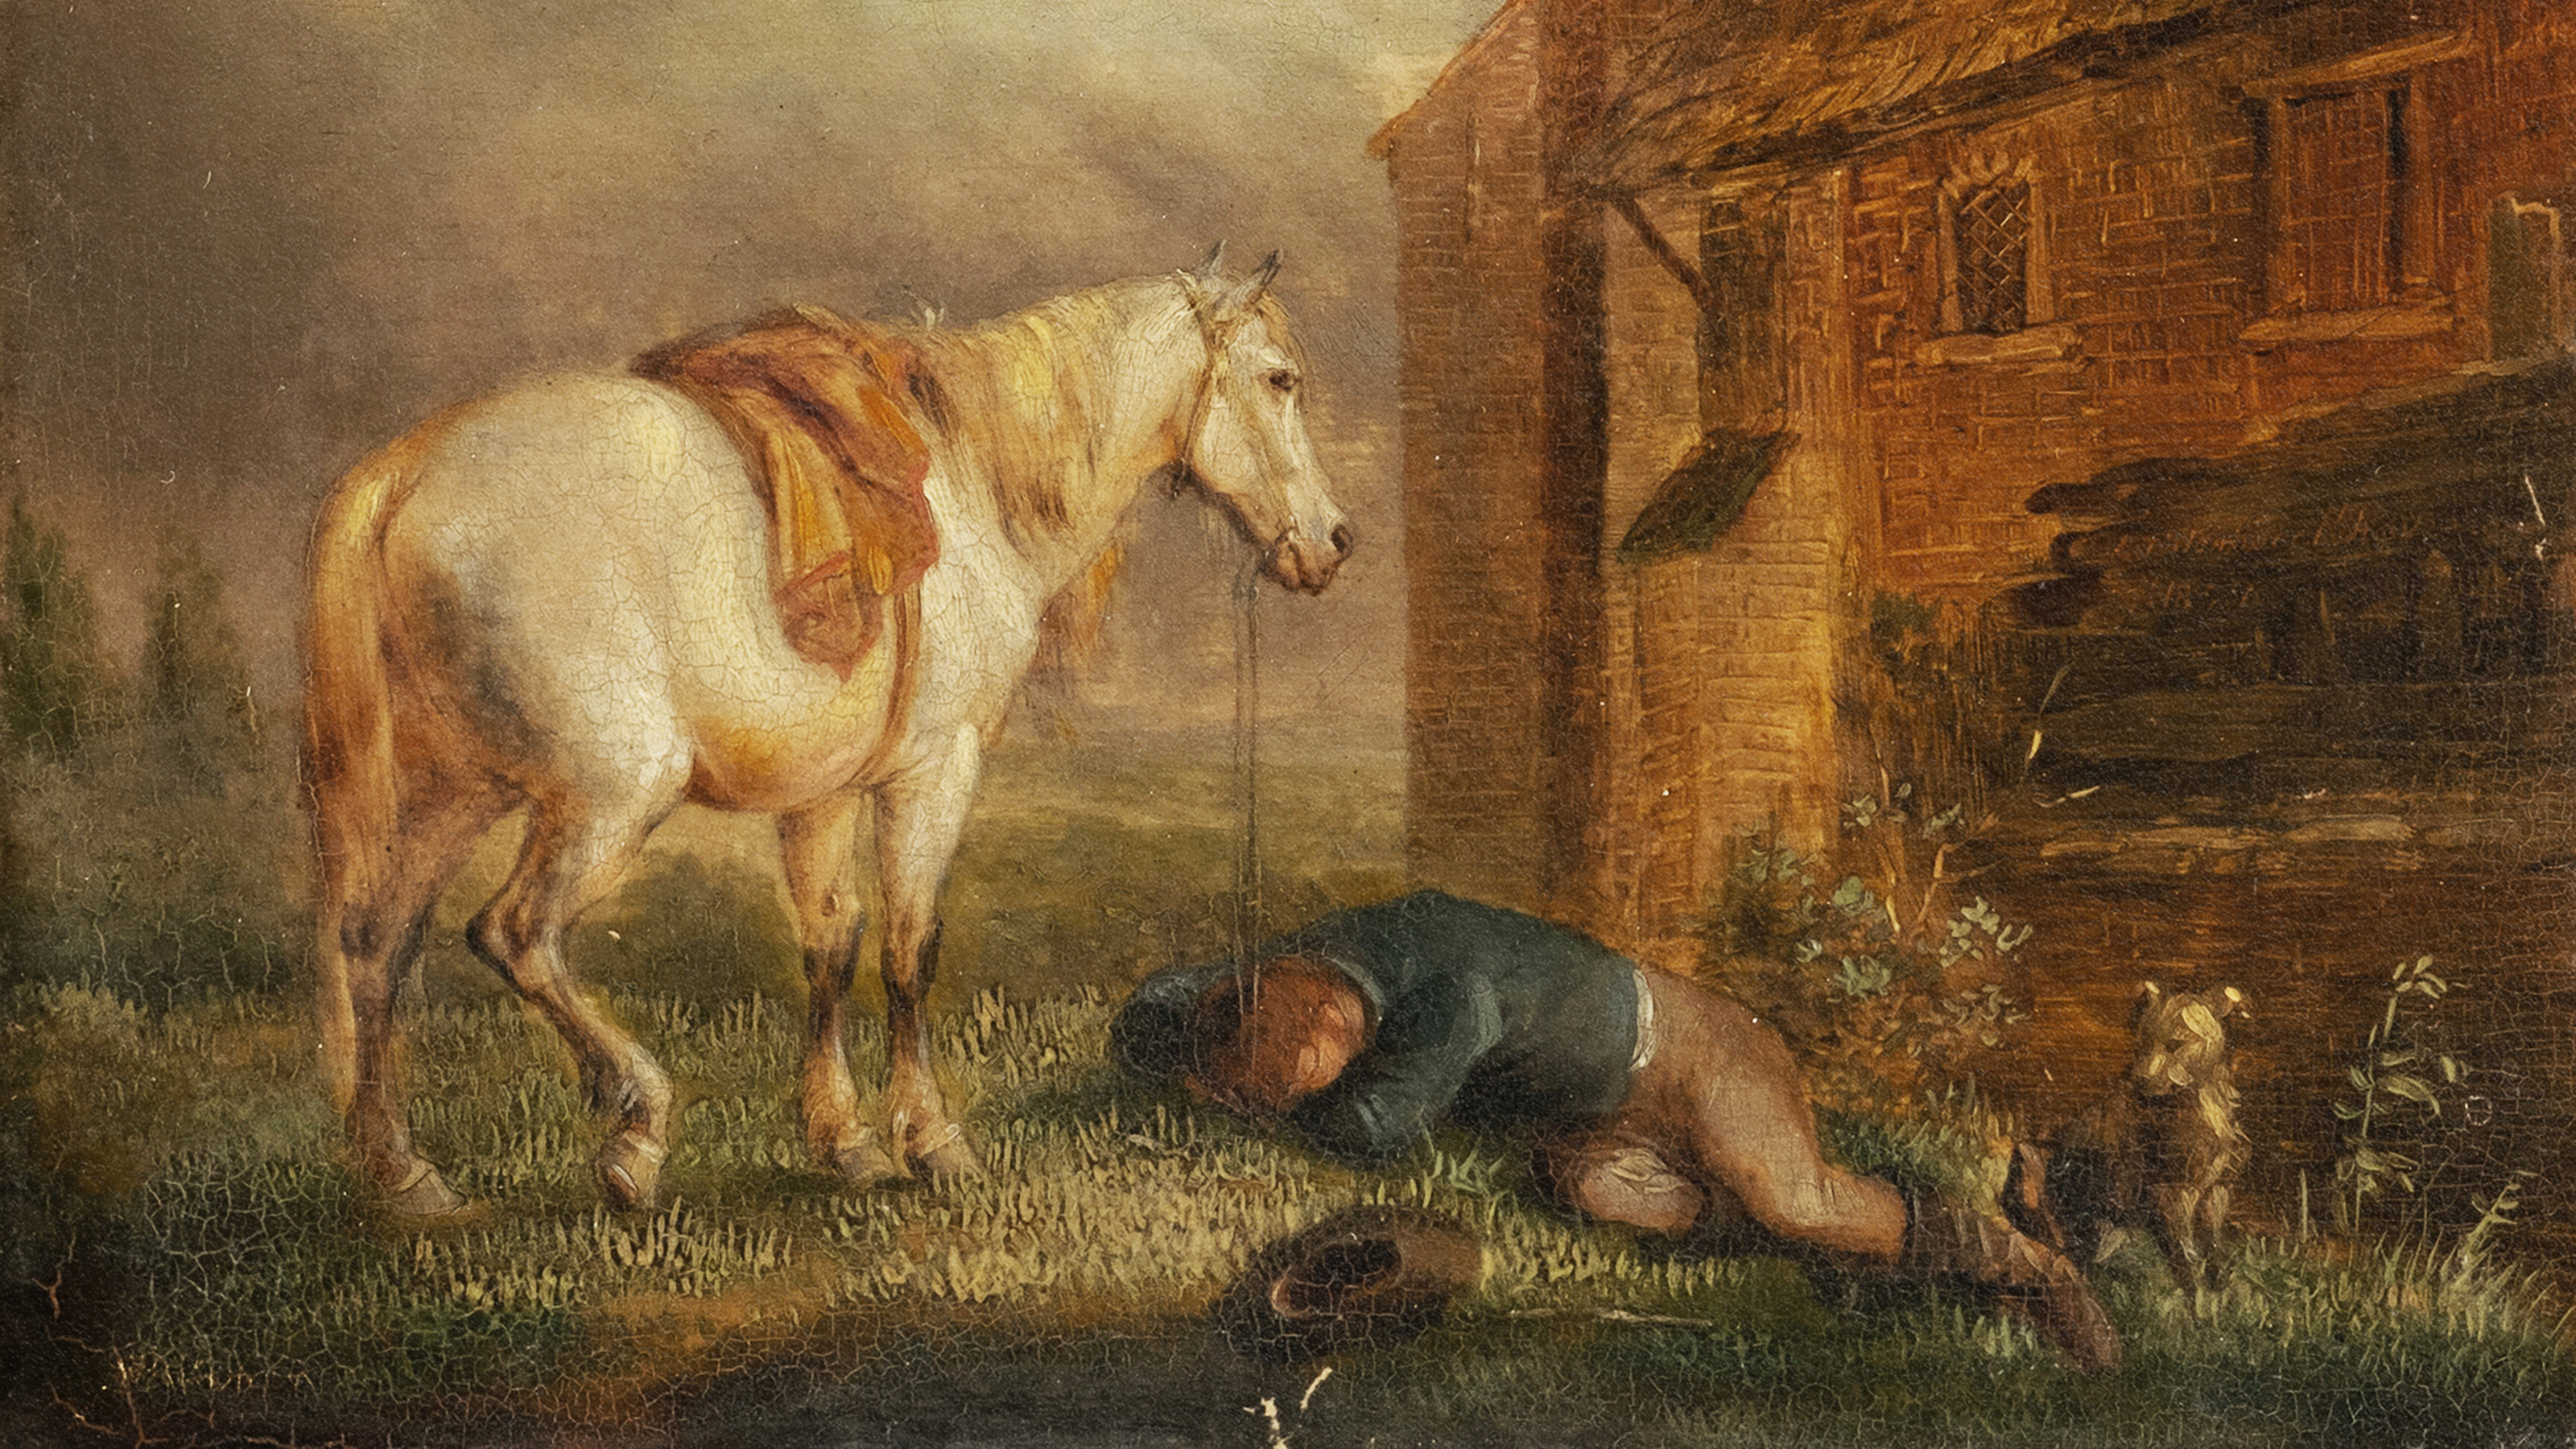 A man napping next to a horse in a painting.